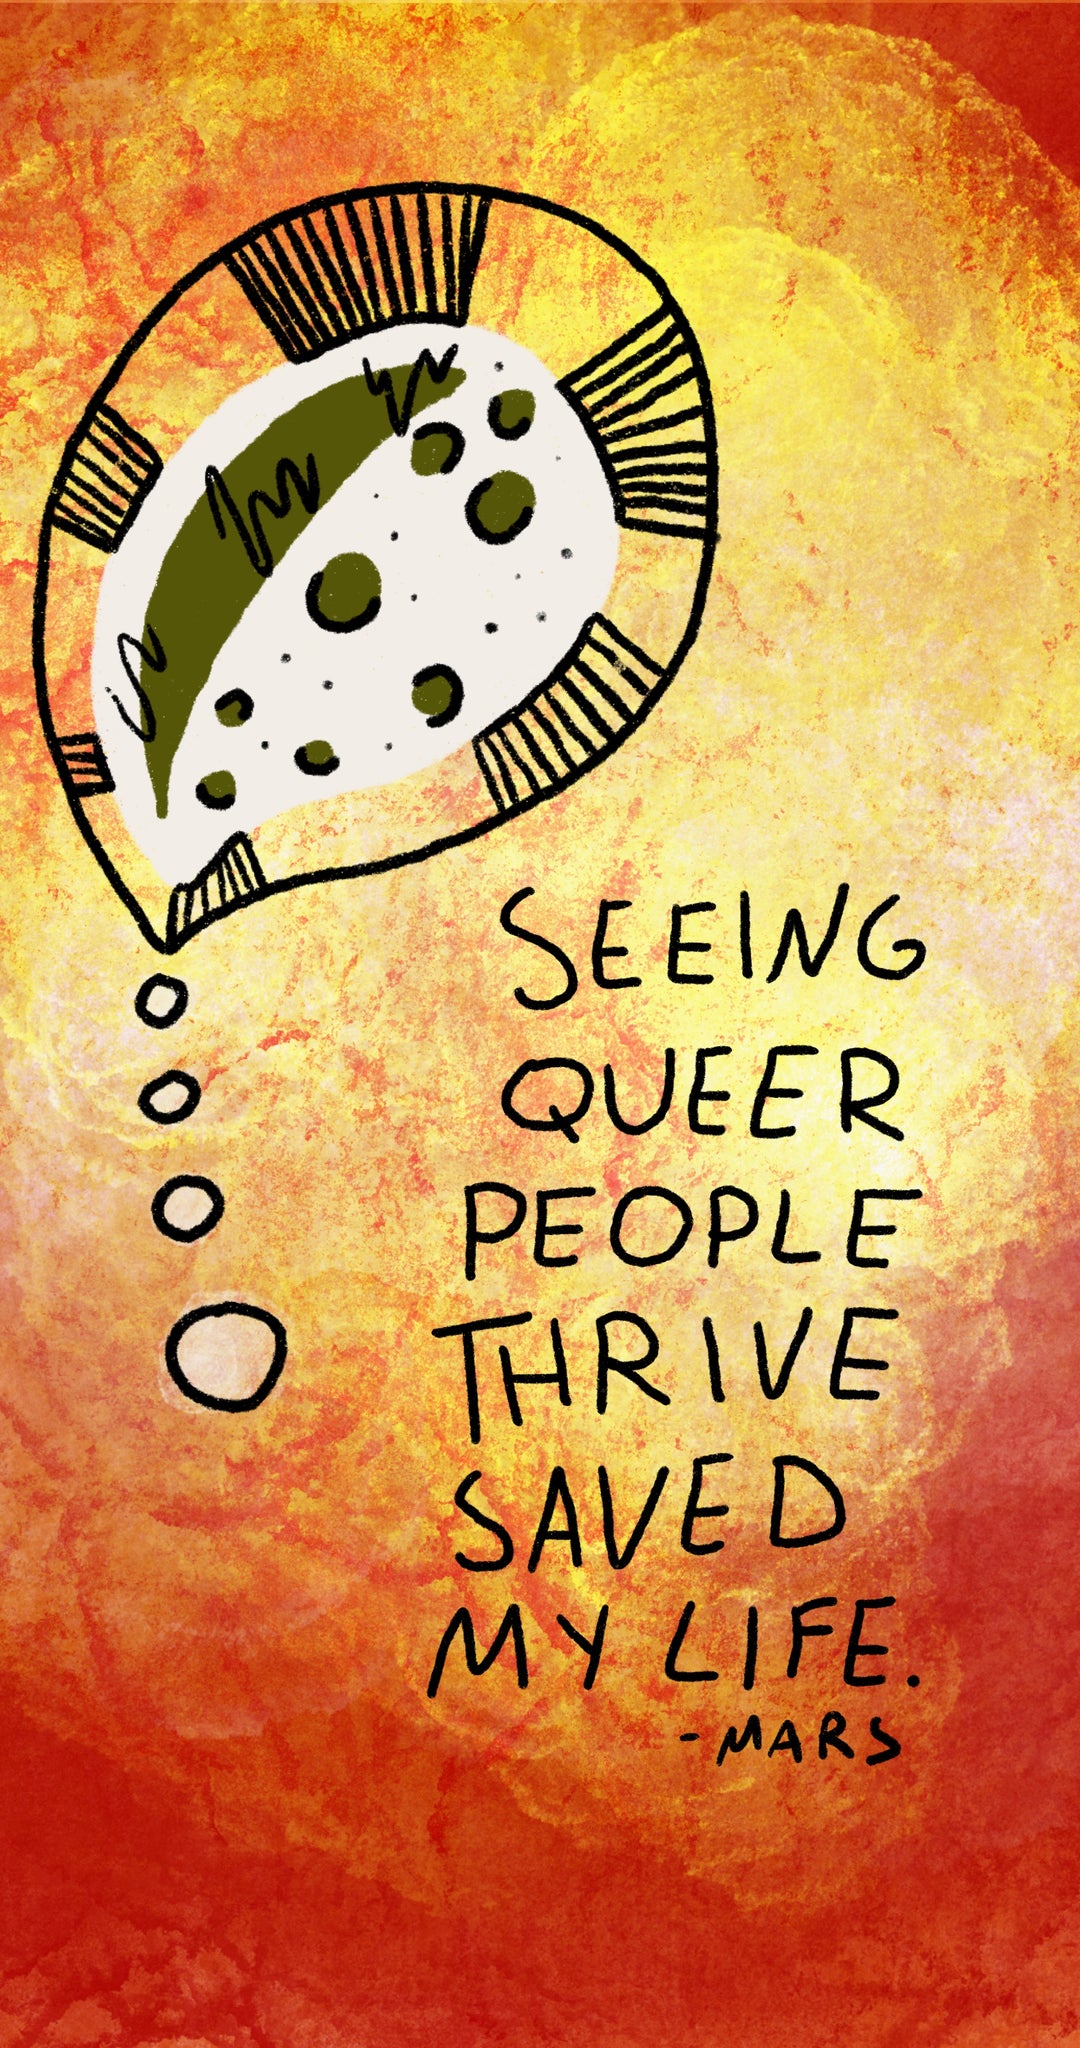 seeing queer people thrive saved my life